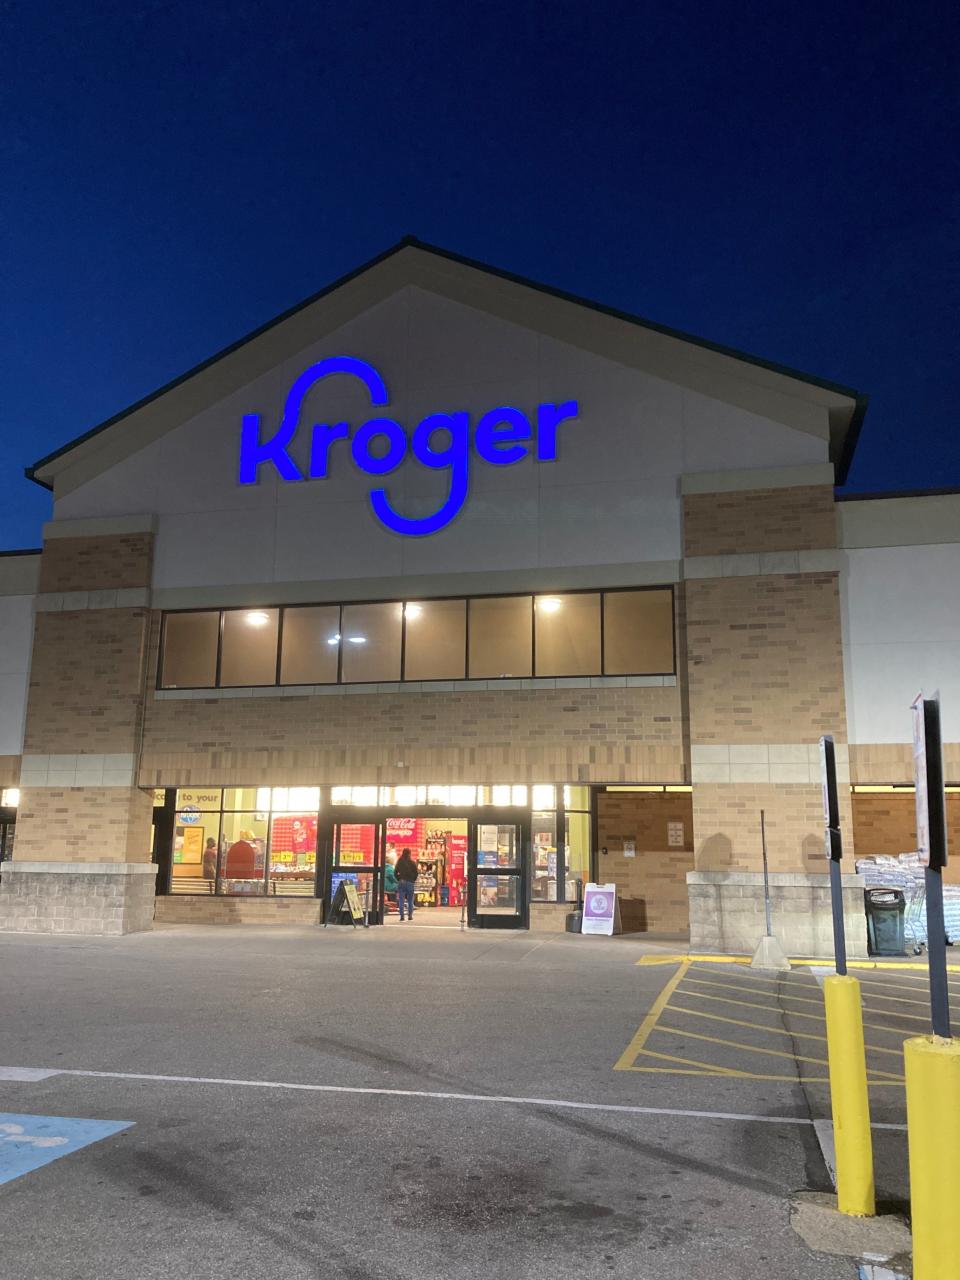 Kroger is being sued by about 1,500 former assistant managers, who claim the grocer used them to save money on payroll costs.